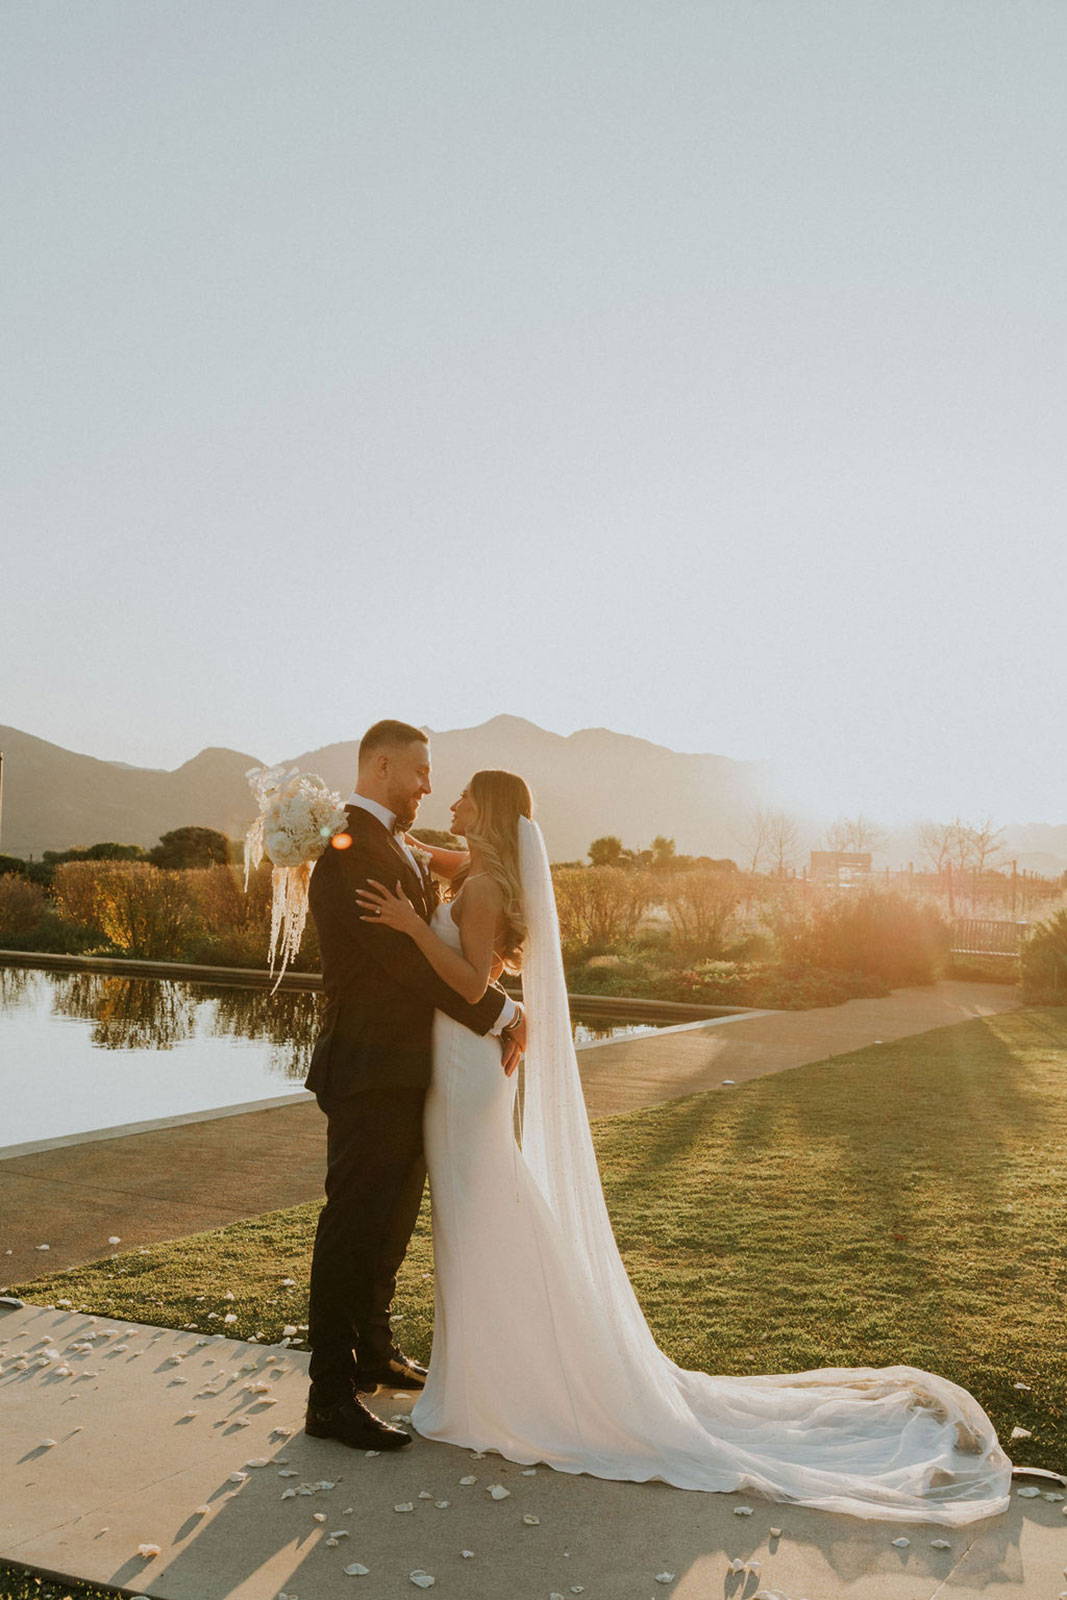 Kirsty in the Honey Silk Gown and Pearly Long Veil